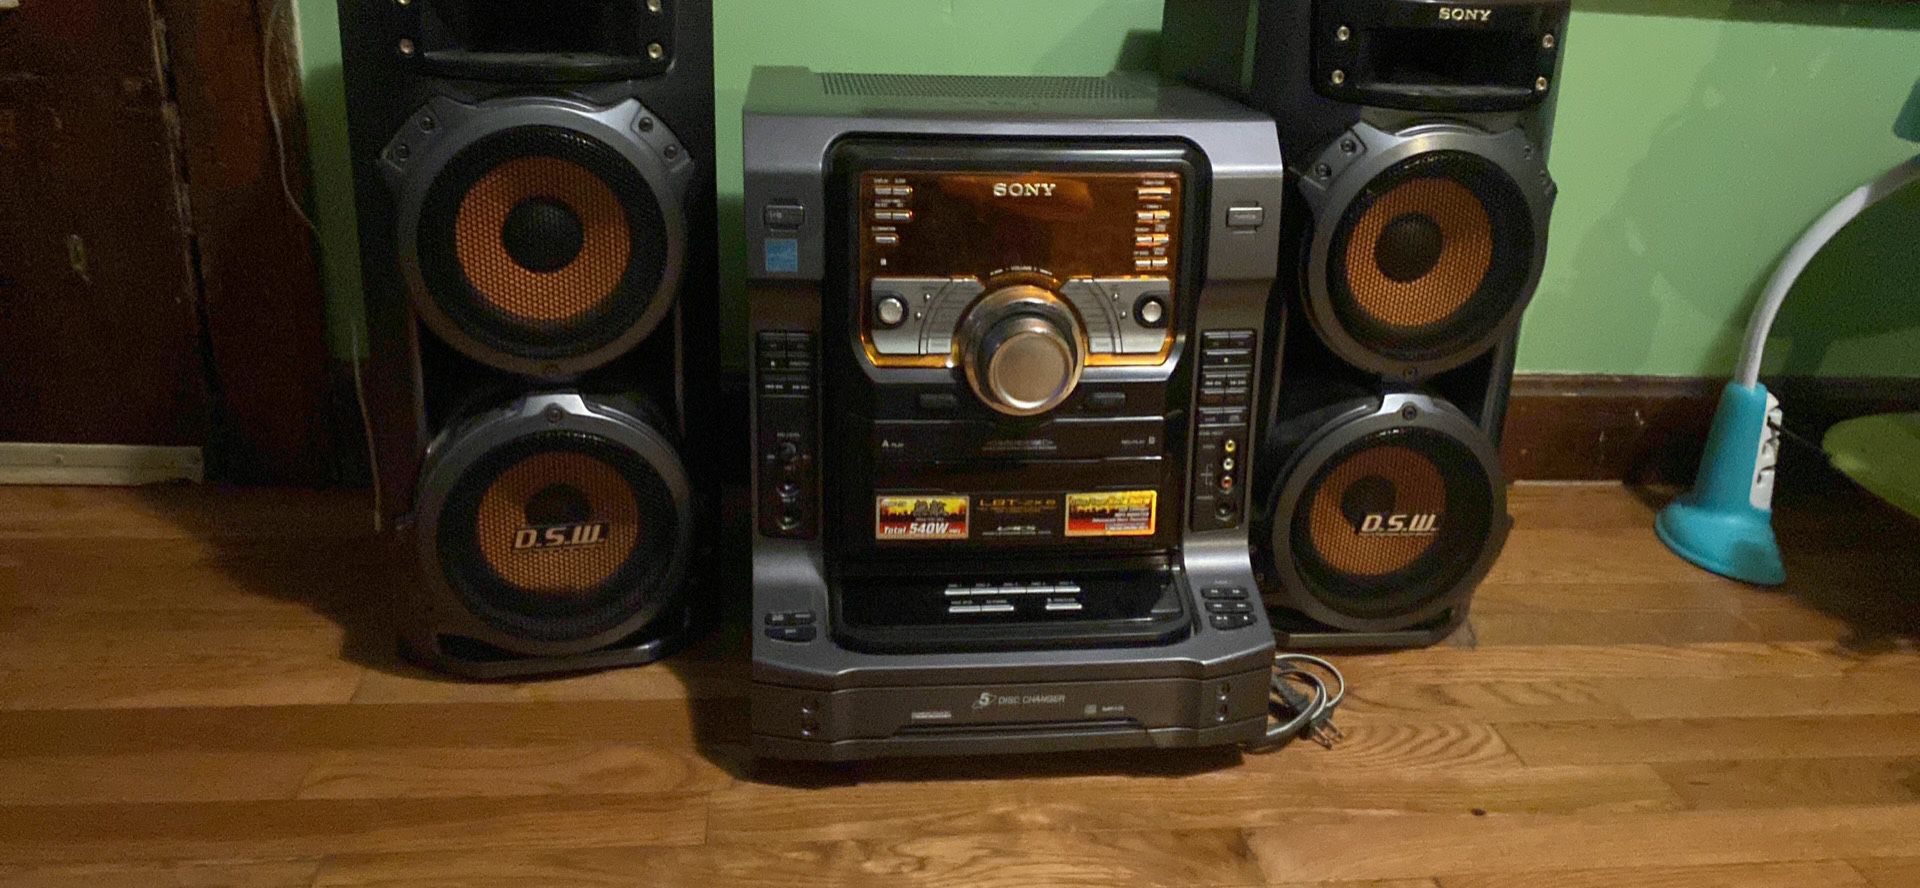 Sony Stereo And Speaker Ss-zx66i